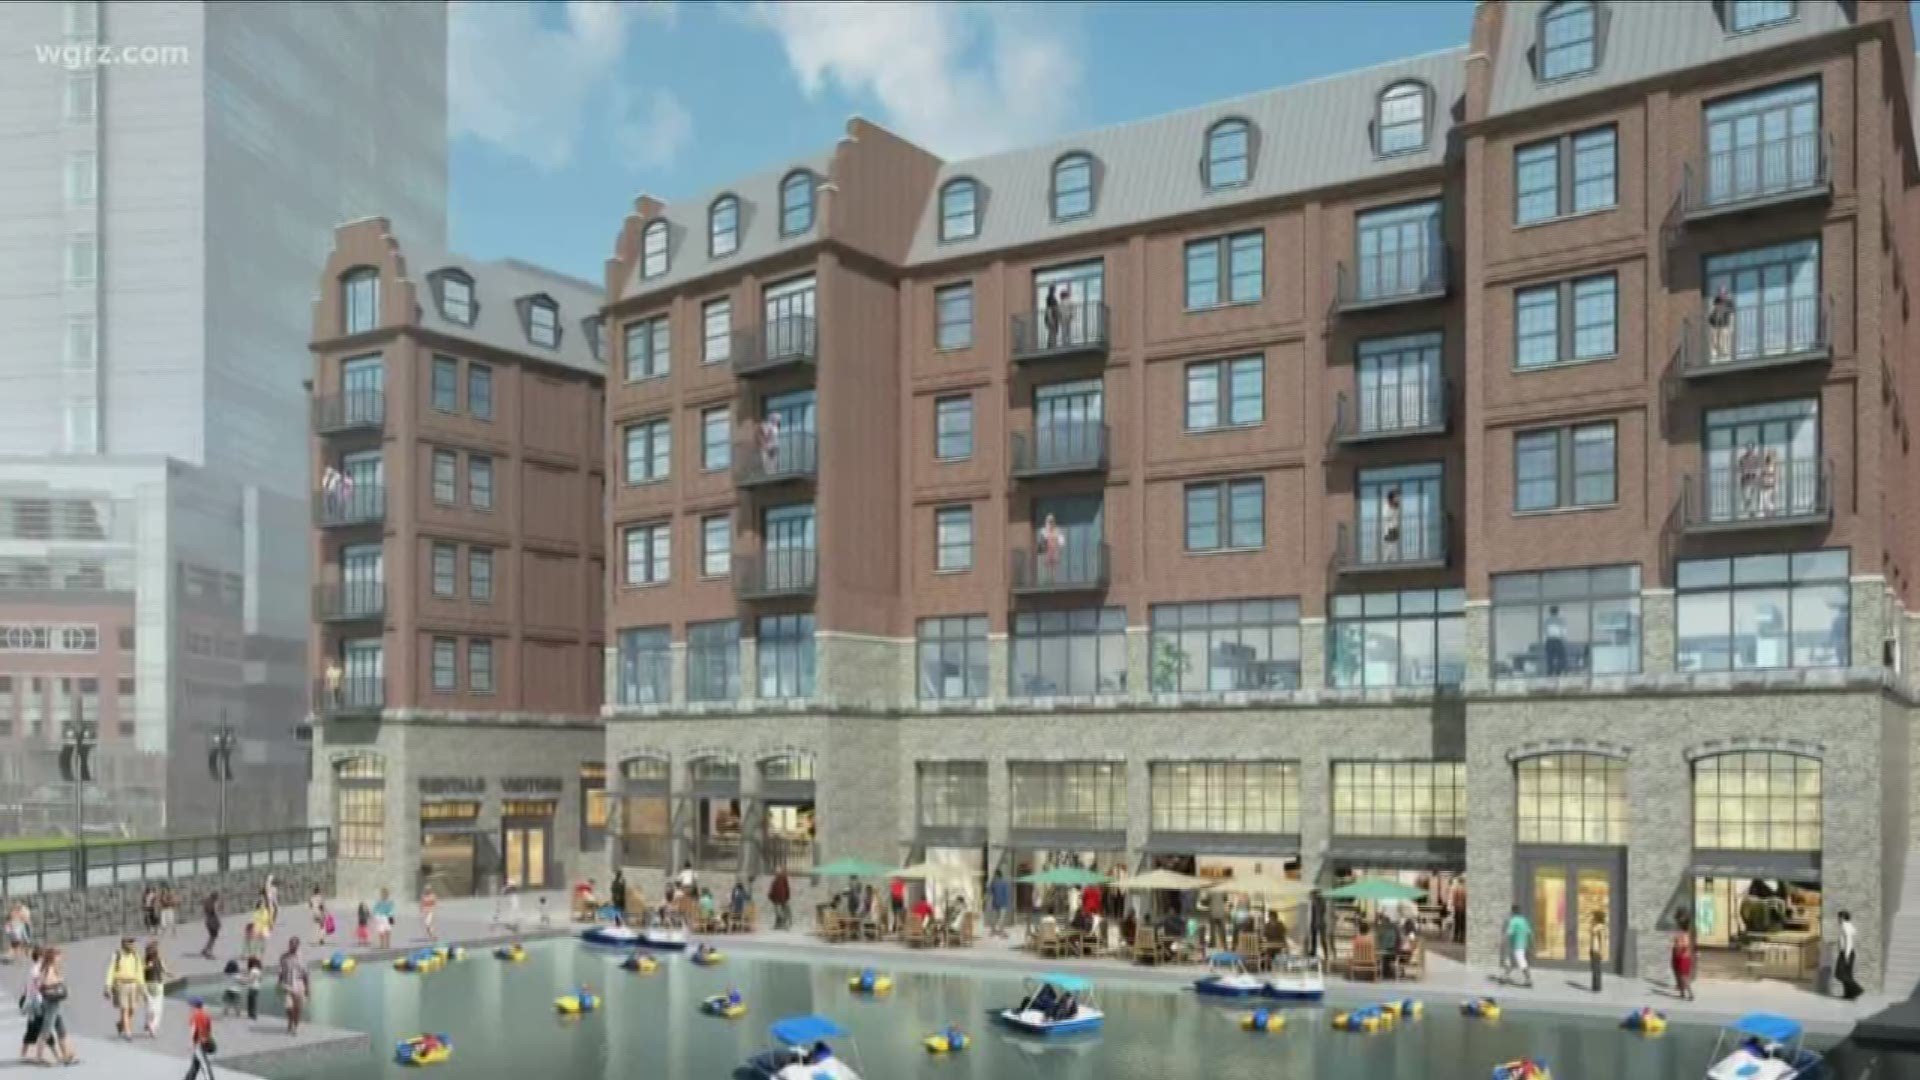 The plan is to build two mixed-use buildings in waterfront's South Aud Block.